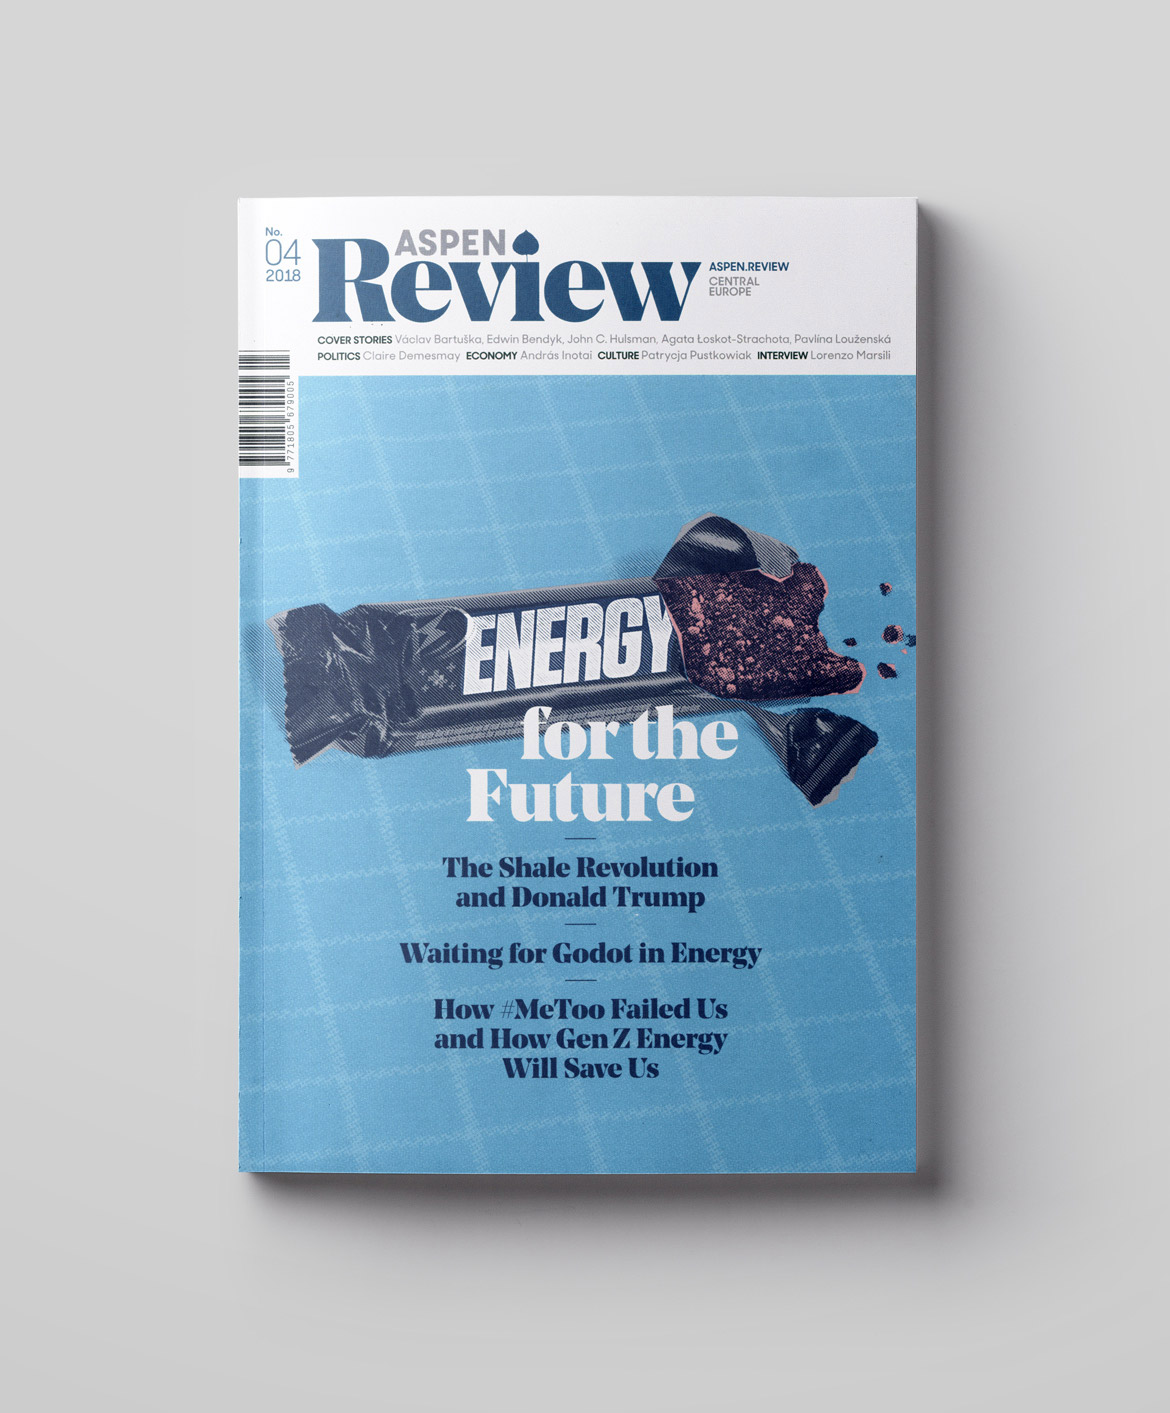 aspenreview8